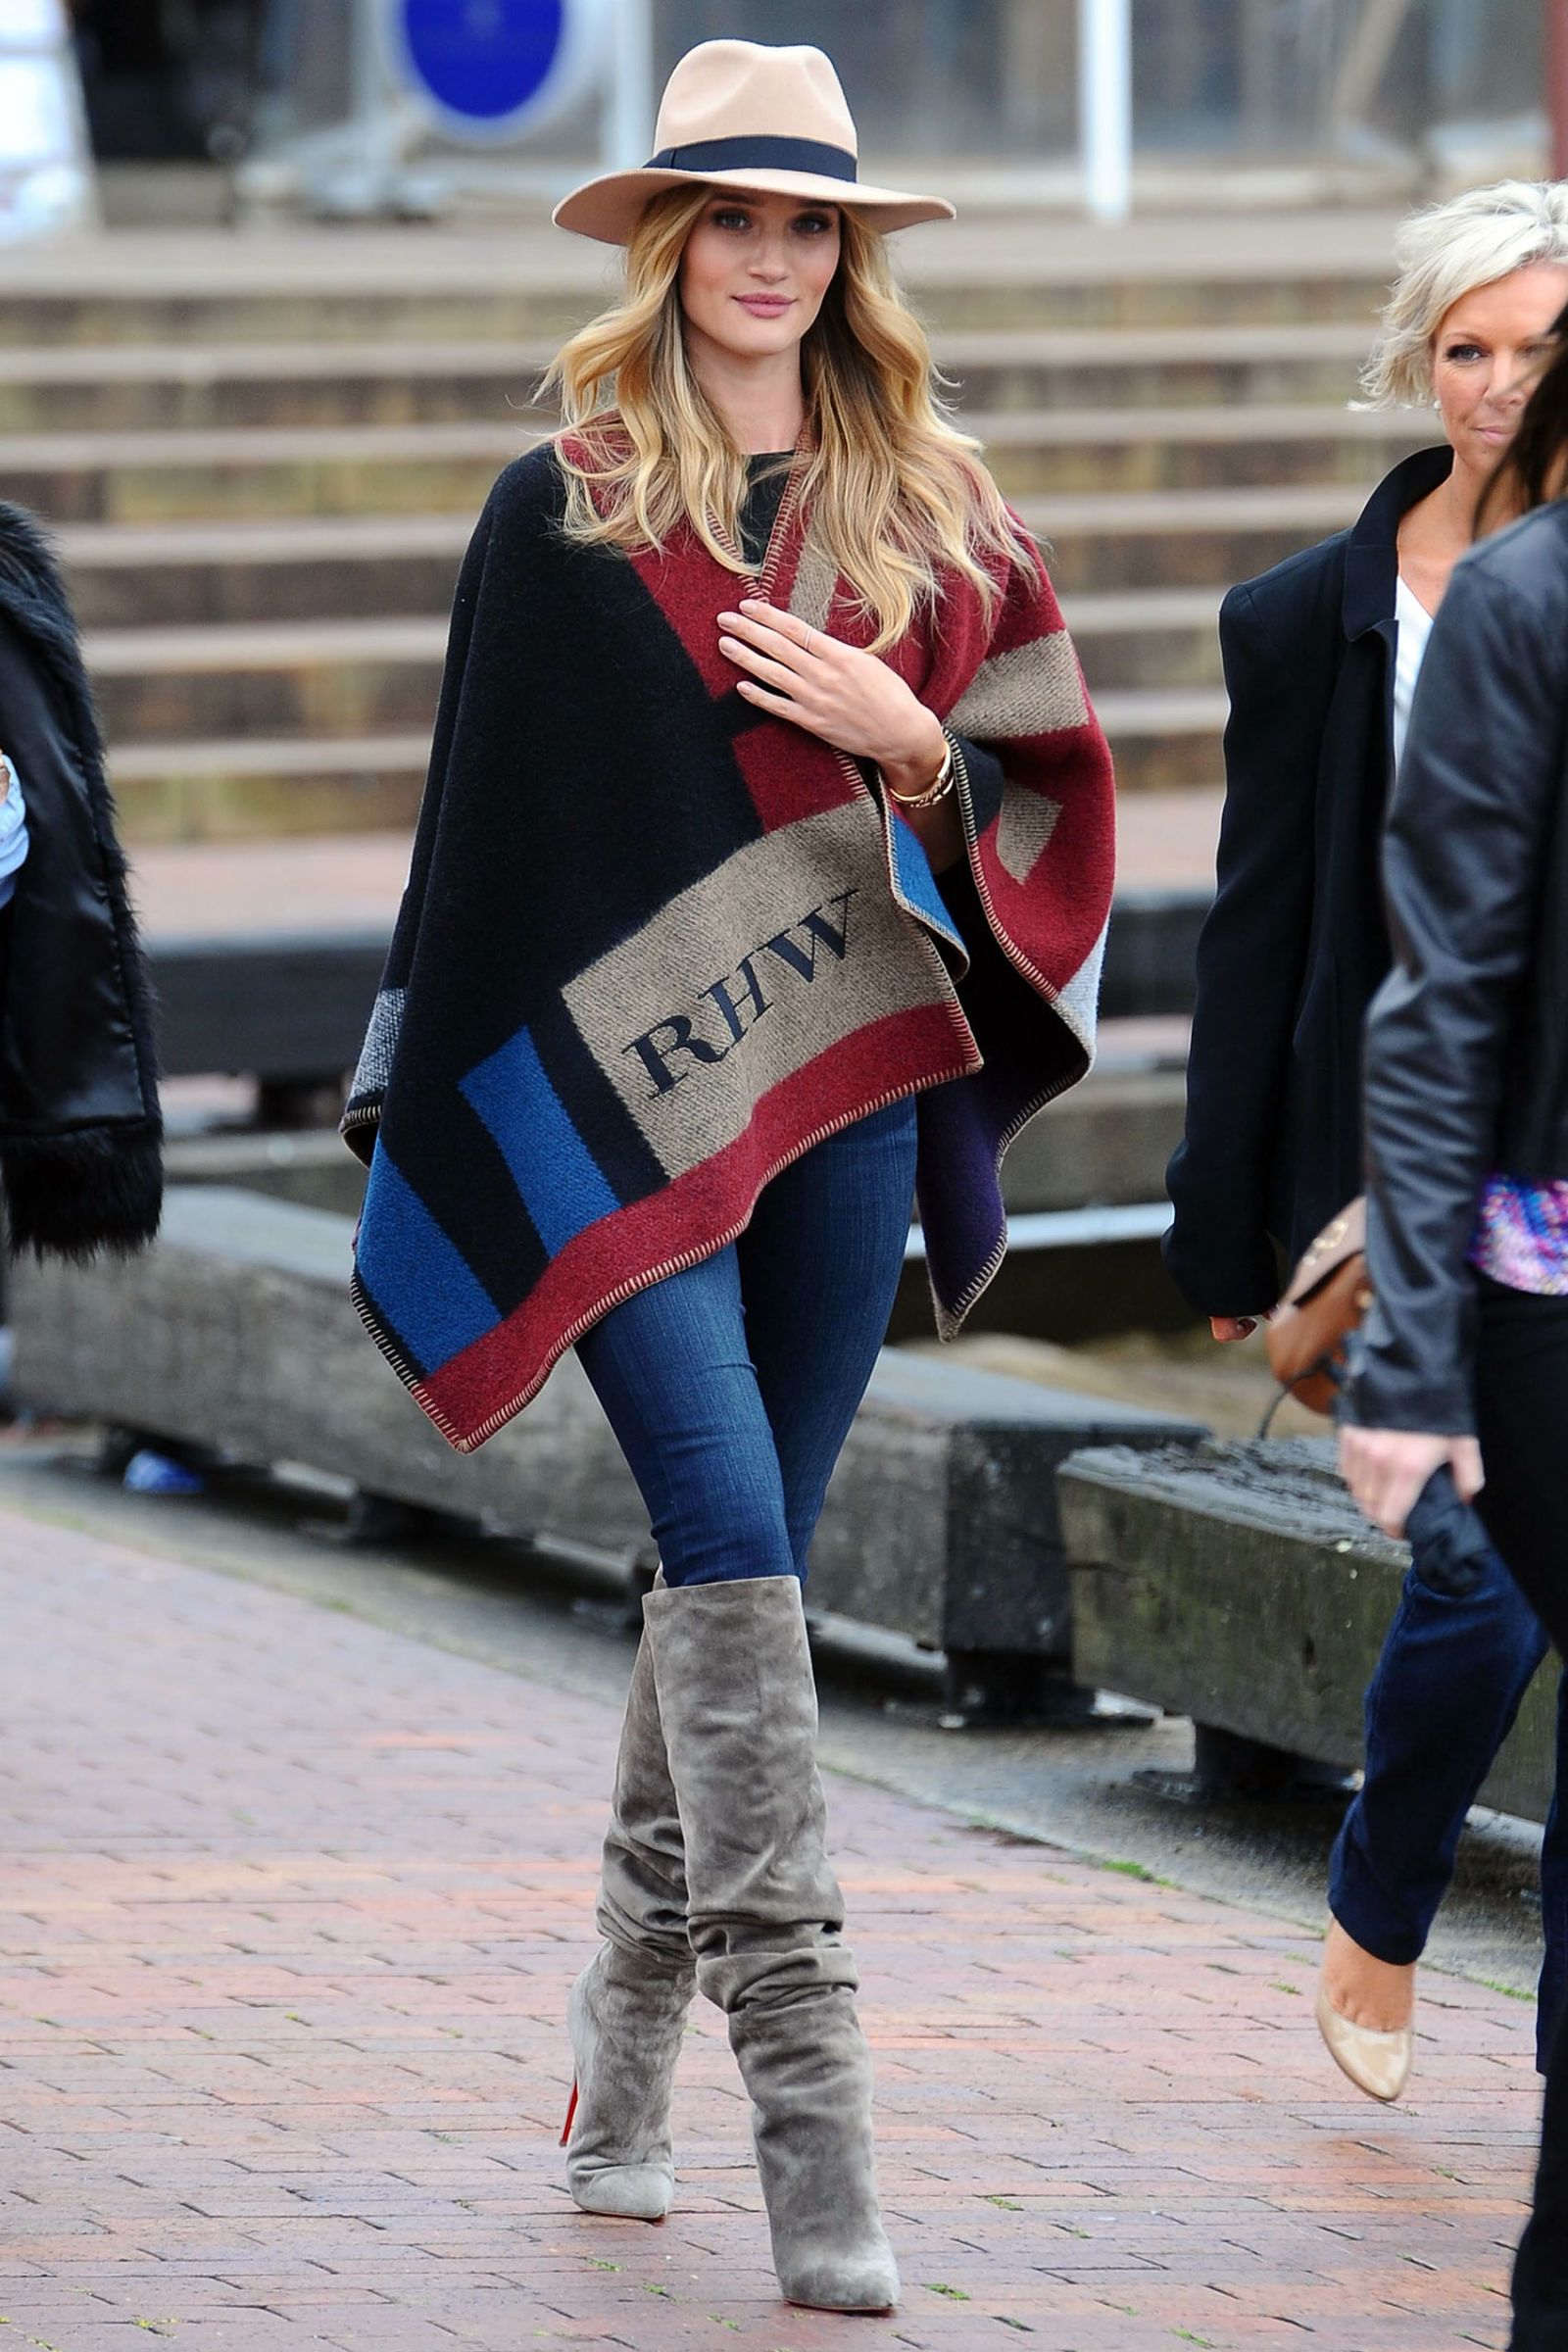 Burberry Cape Coat Best Celebrity Looks In The Burberry Cape